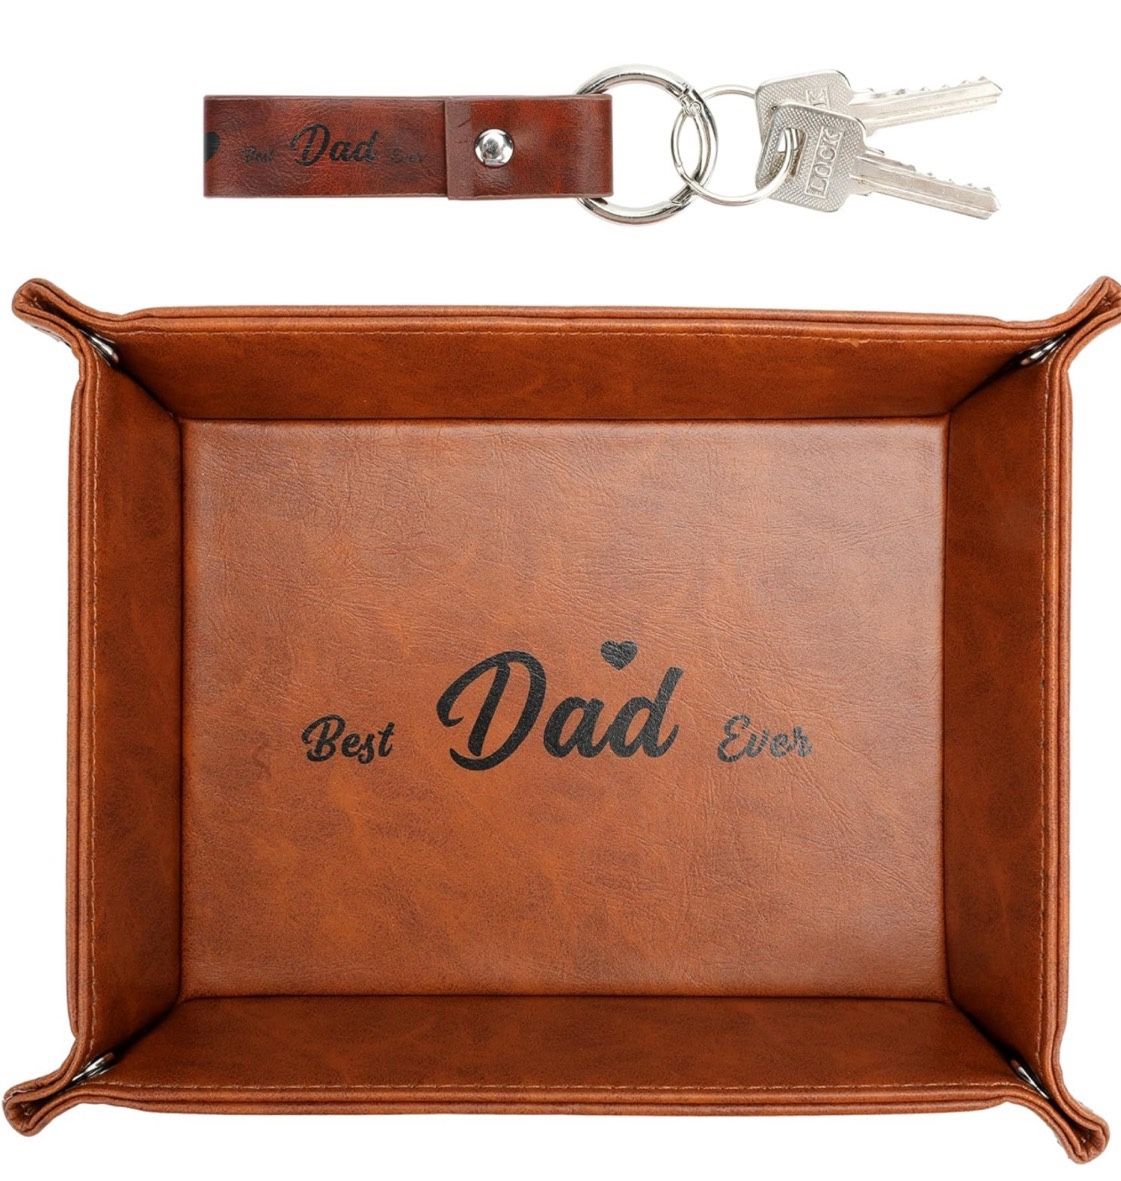 Gifts for Dad from Daughter Son Kids, Best Dad Ever Gifts, Gifts for Dad Who Wants Nothing, Birthday Gifts for Dad Stepdad Husband, PU Leather Valet T